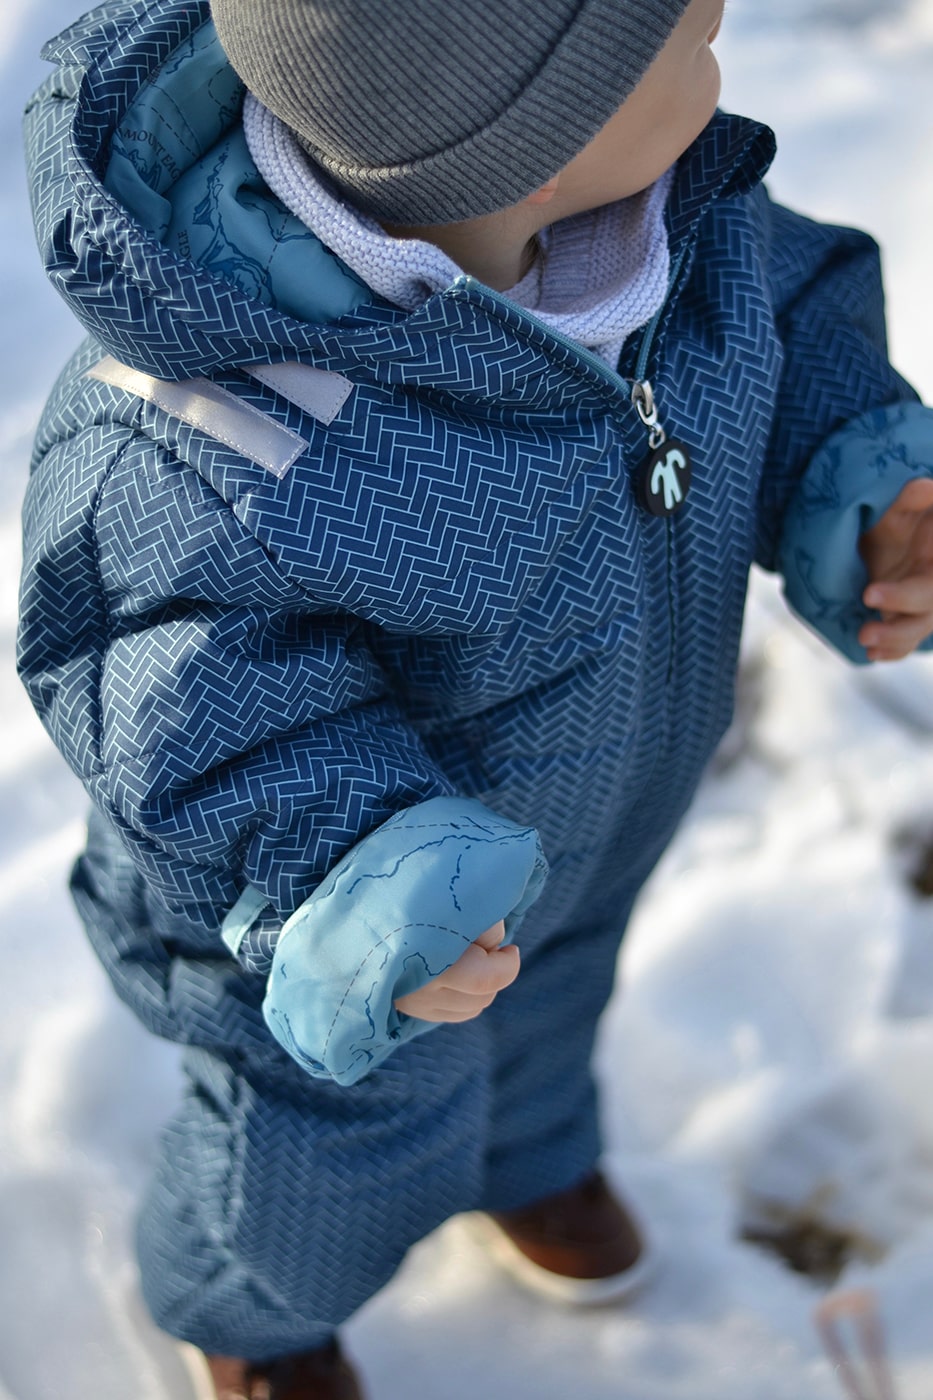 <tc>Ducksday</tc>  winter overalls for children up to 98cm tall